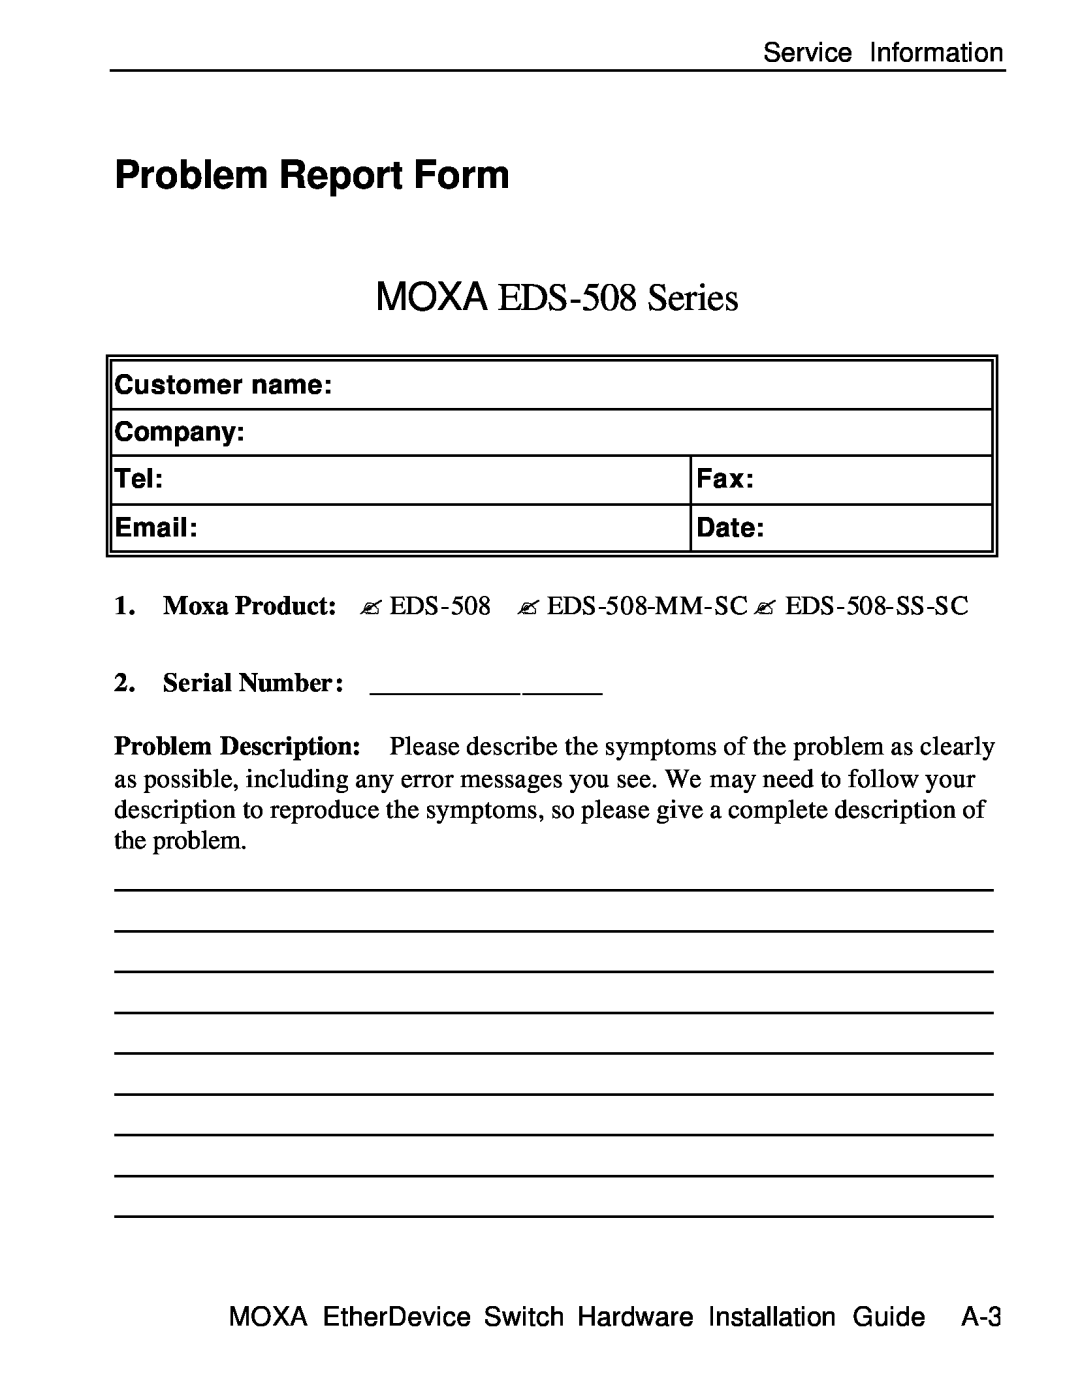 Moxa Technologies manual Problem Report Form, MOXA EDS-508 Series, Customer name, Company, Email, Date 